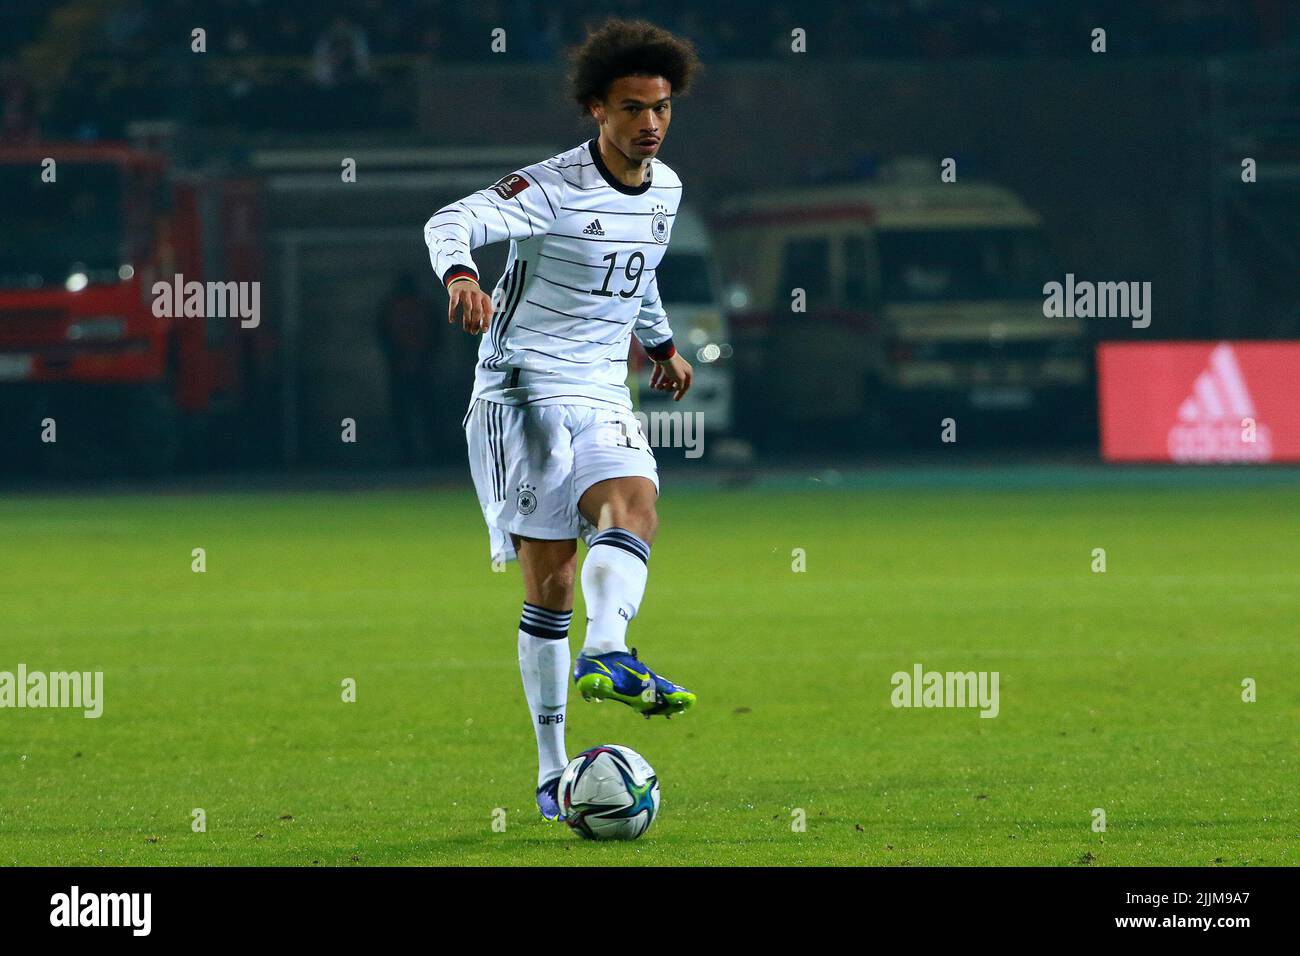 A player of German team Leroy Sane during FIFA World Cup group stage qualification match VS Armenia in Yerevan, Armenia Stock Photo